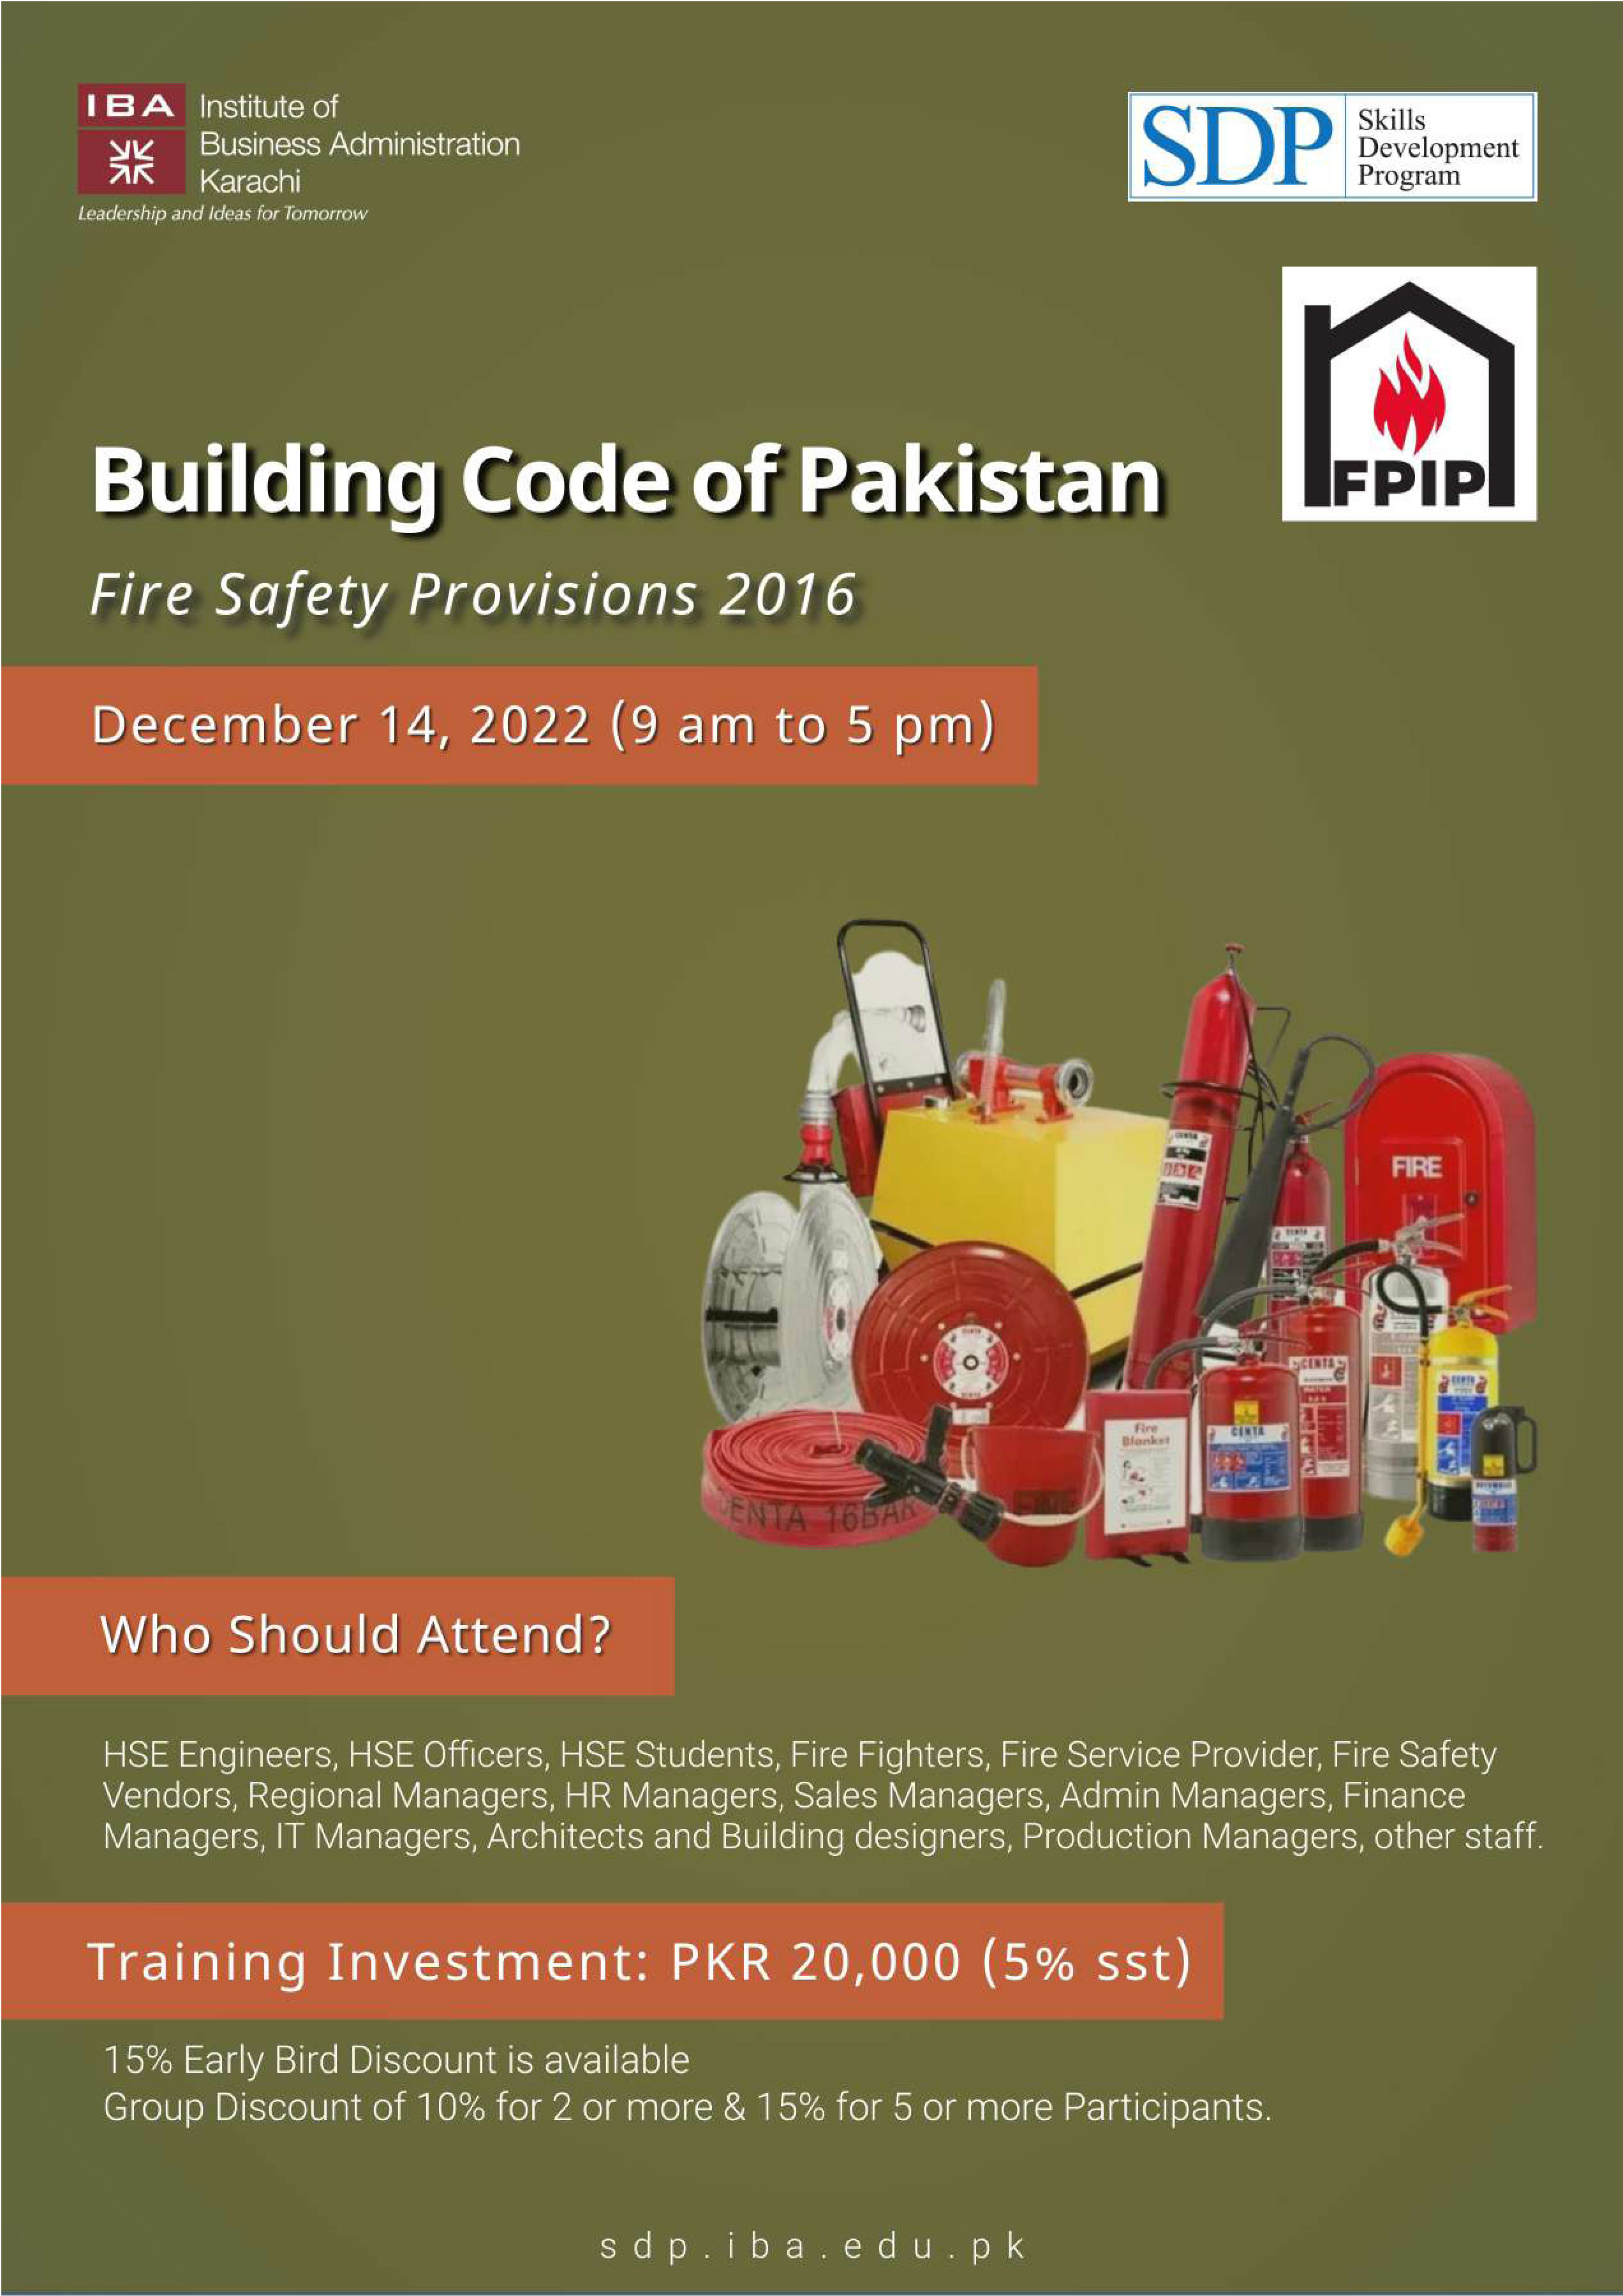 Building Code of Pakistan, Fire Safety Provisions 2016